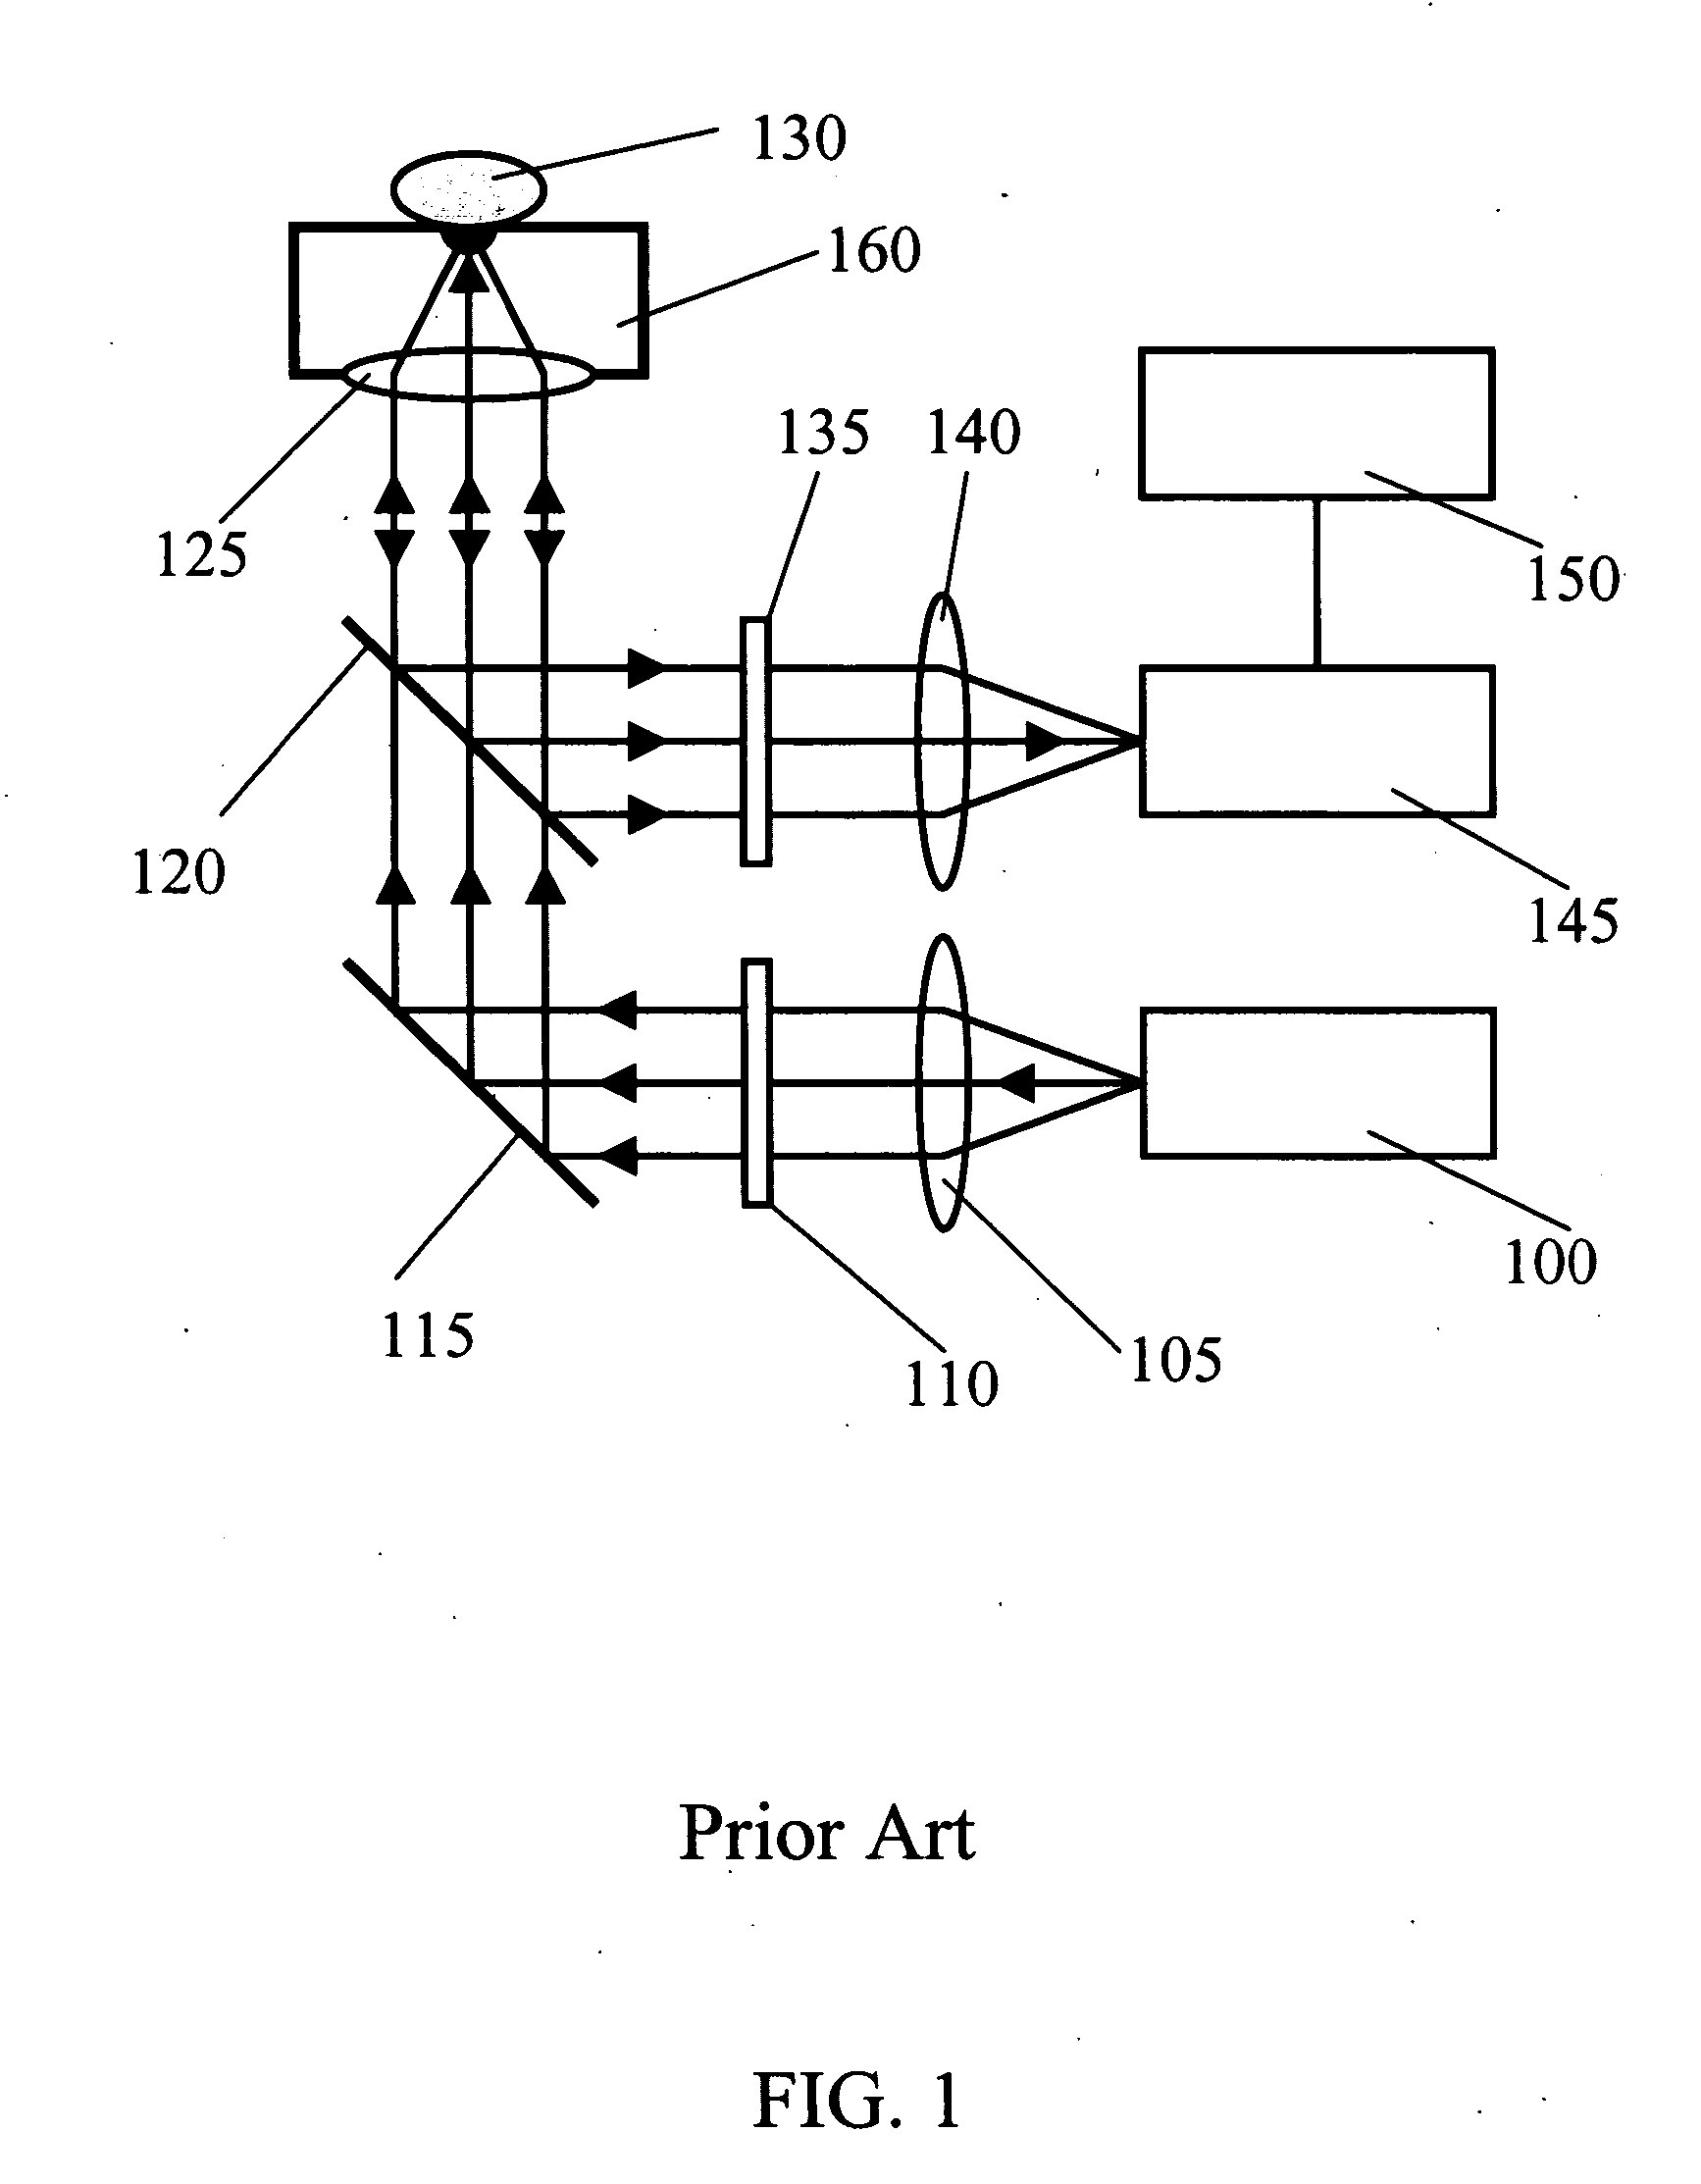 Method and apparatus for non-invasive measurement of blood analytes